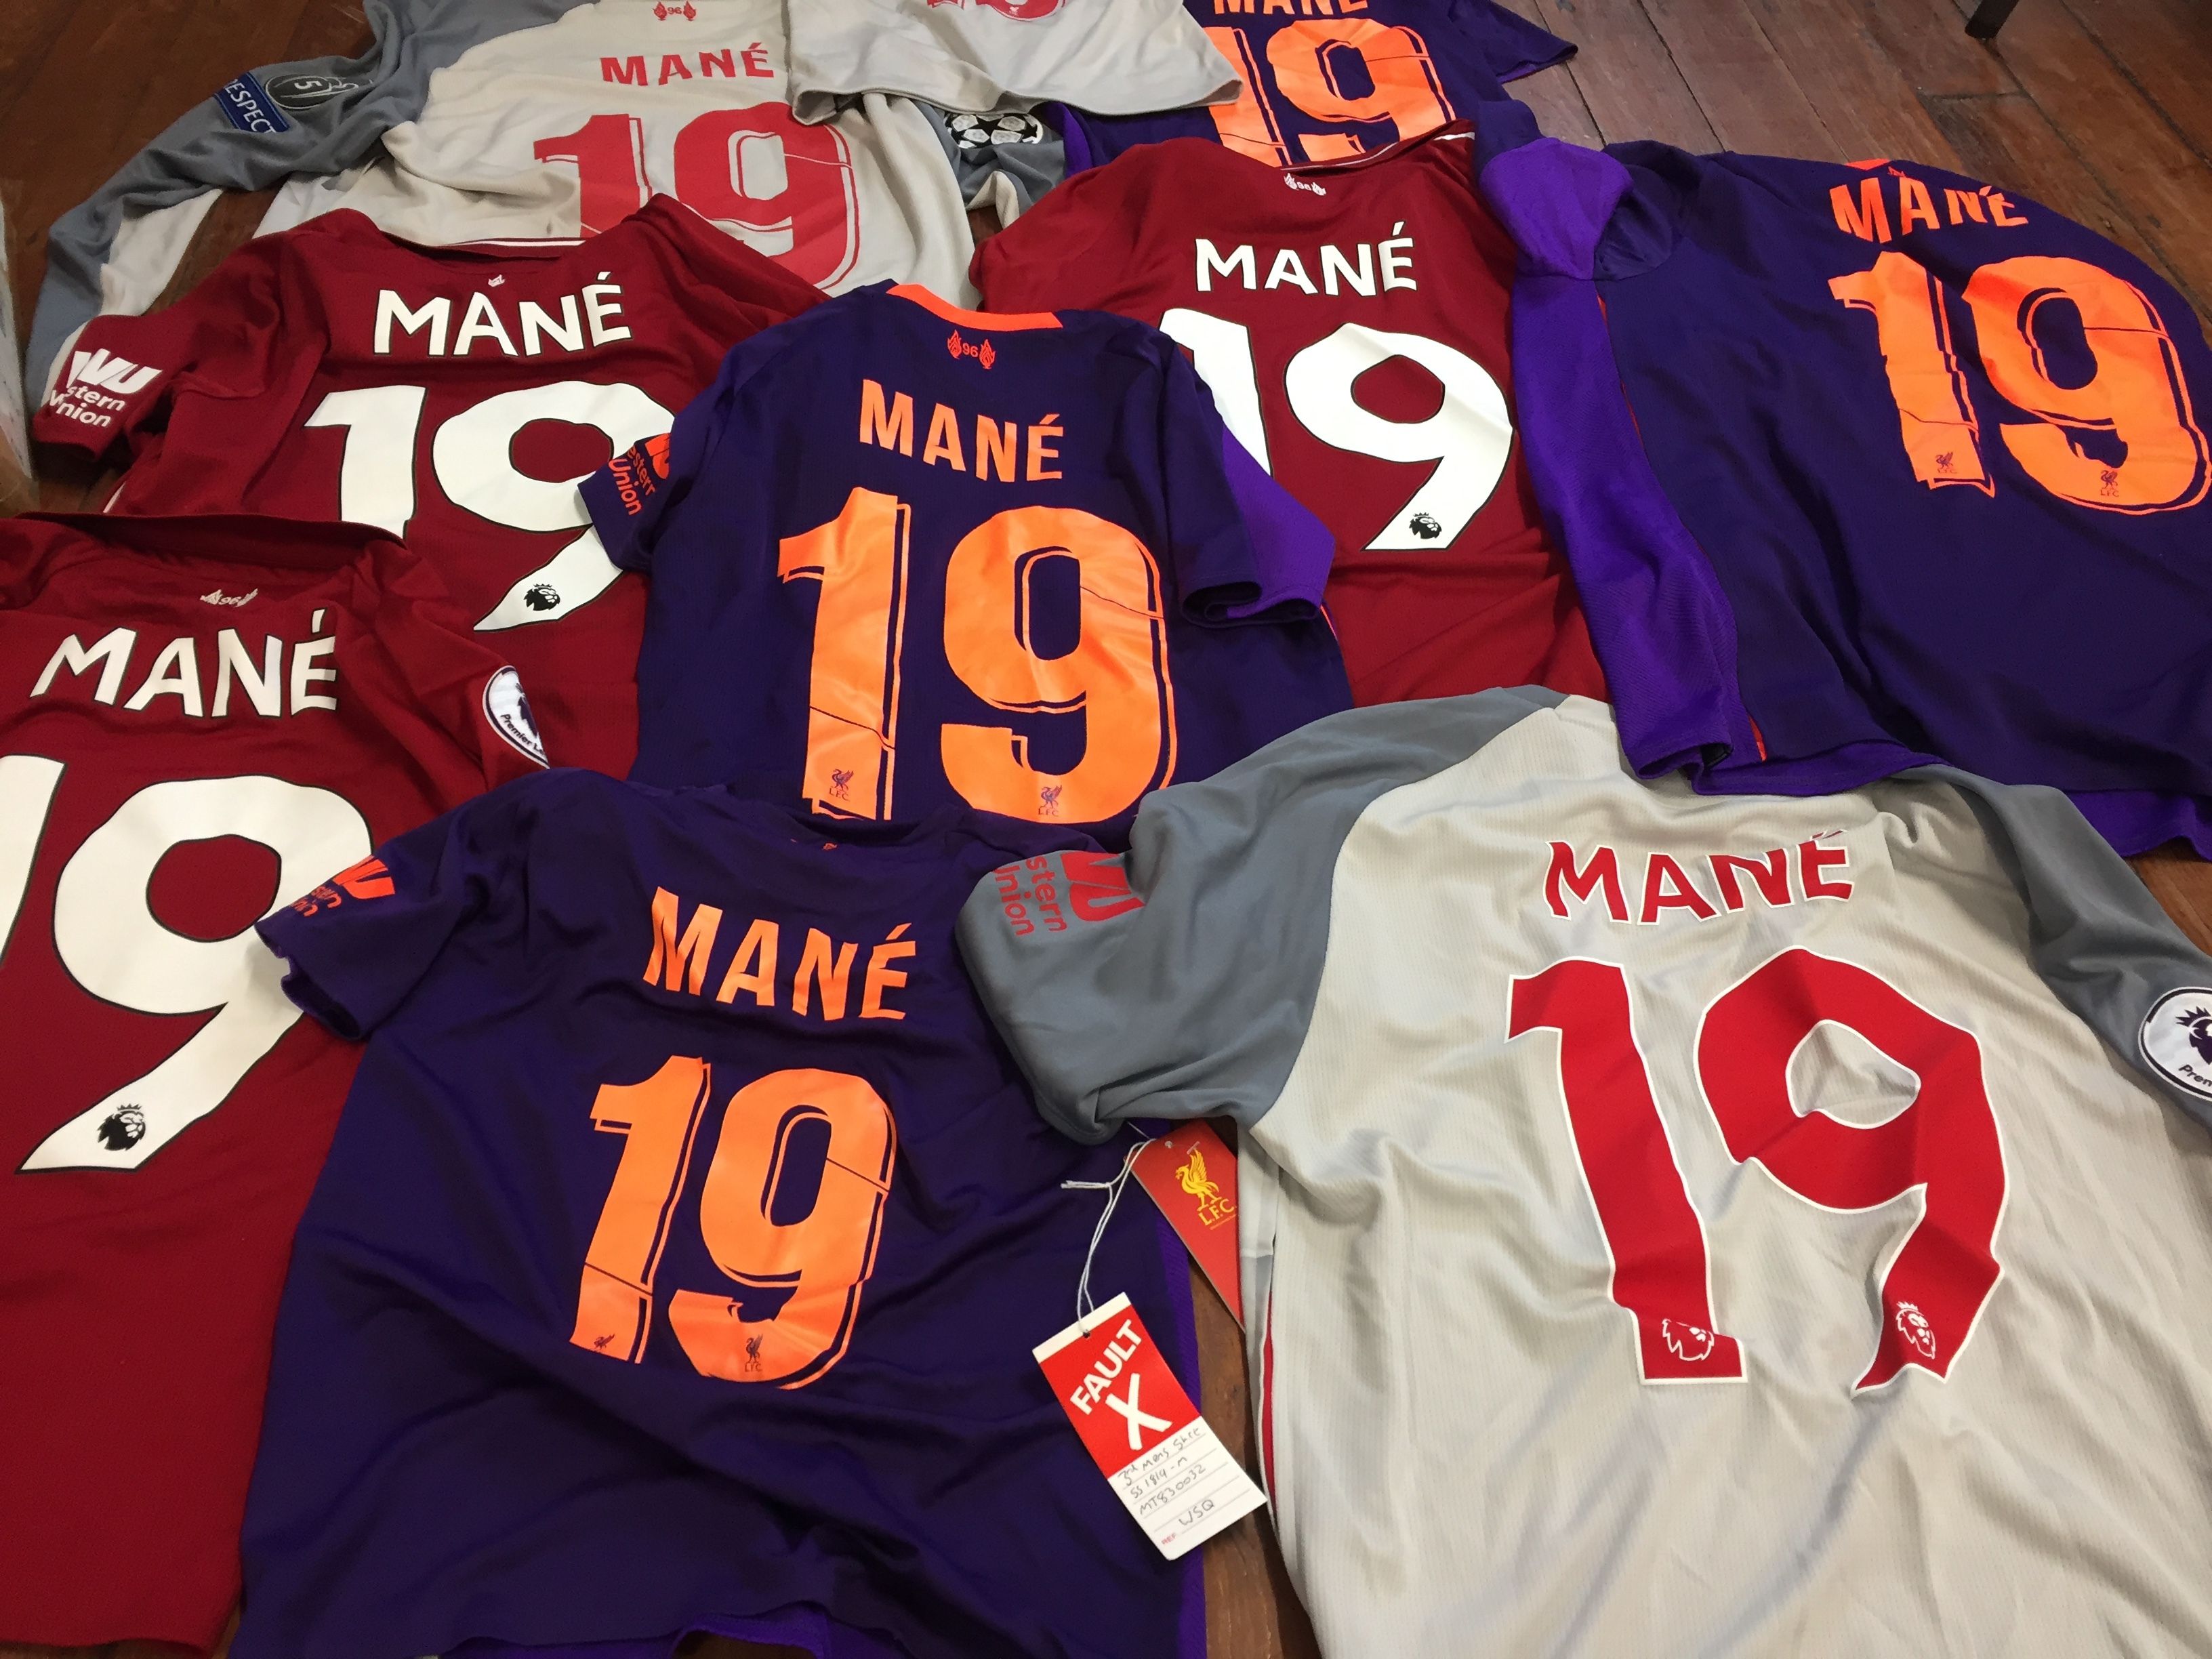 Liverpool's Sadio Mane to send over 100 shirts to orphans in Malawi